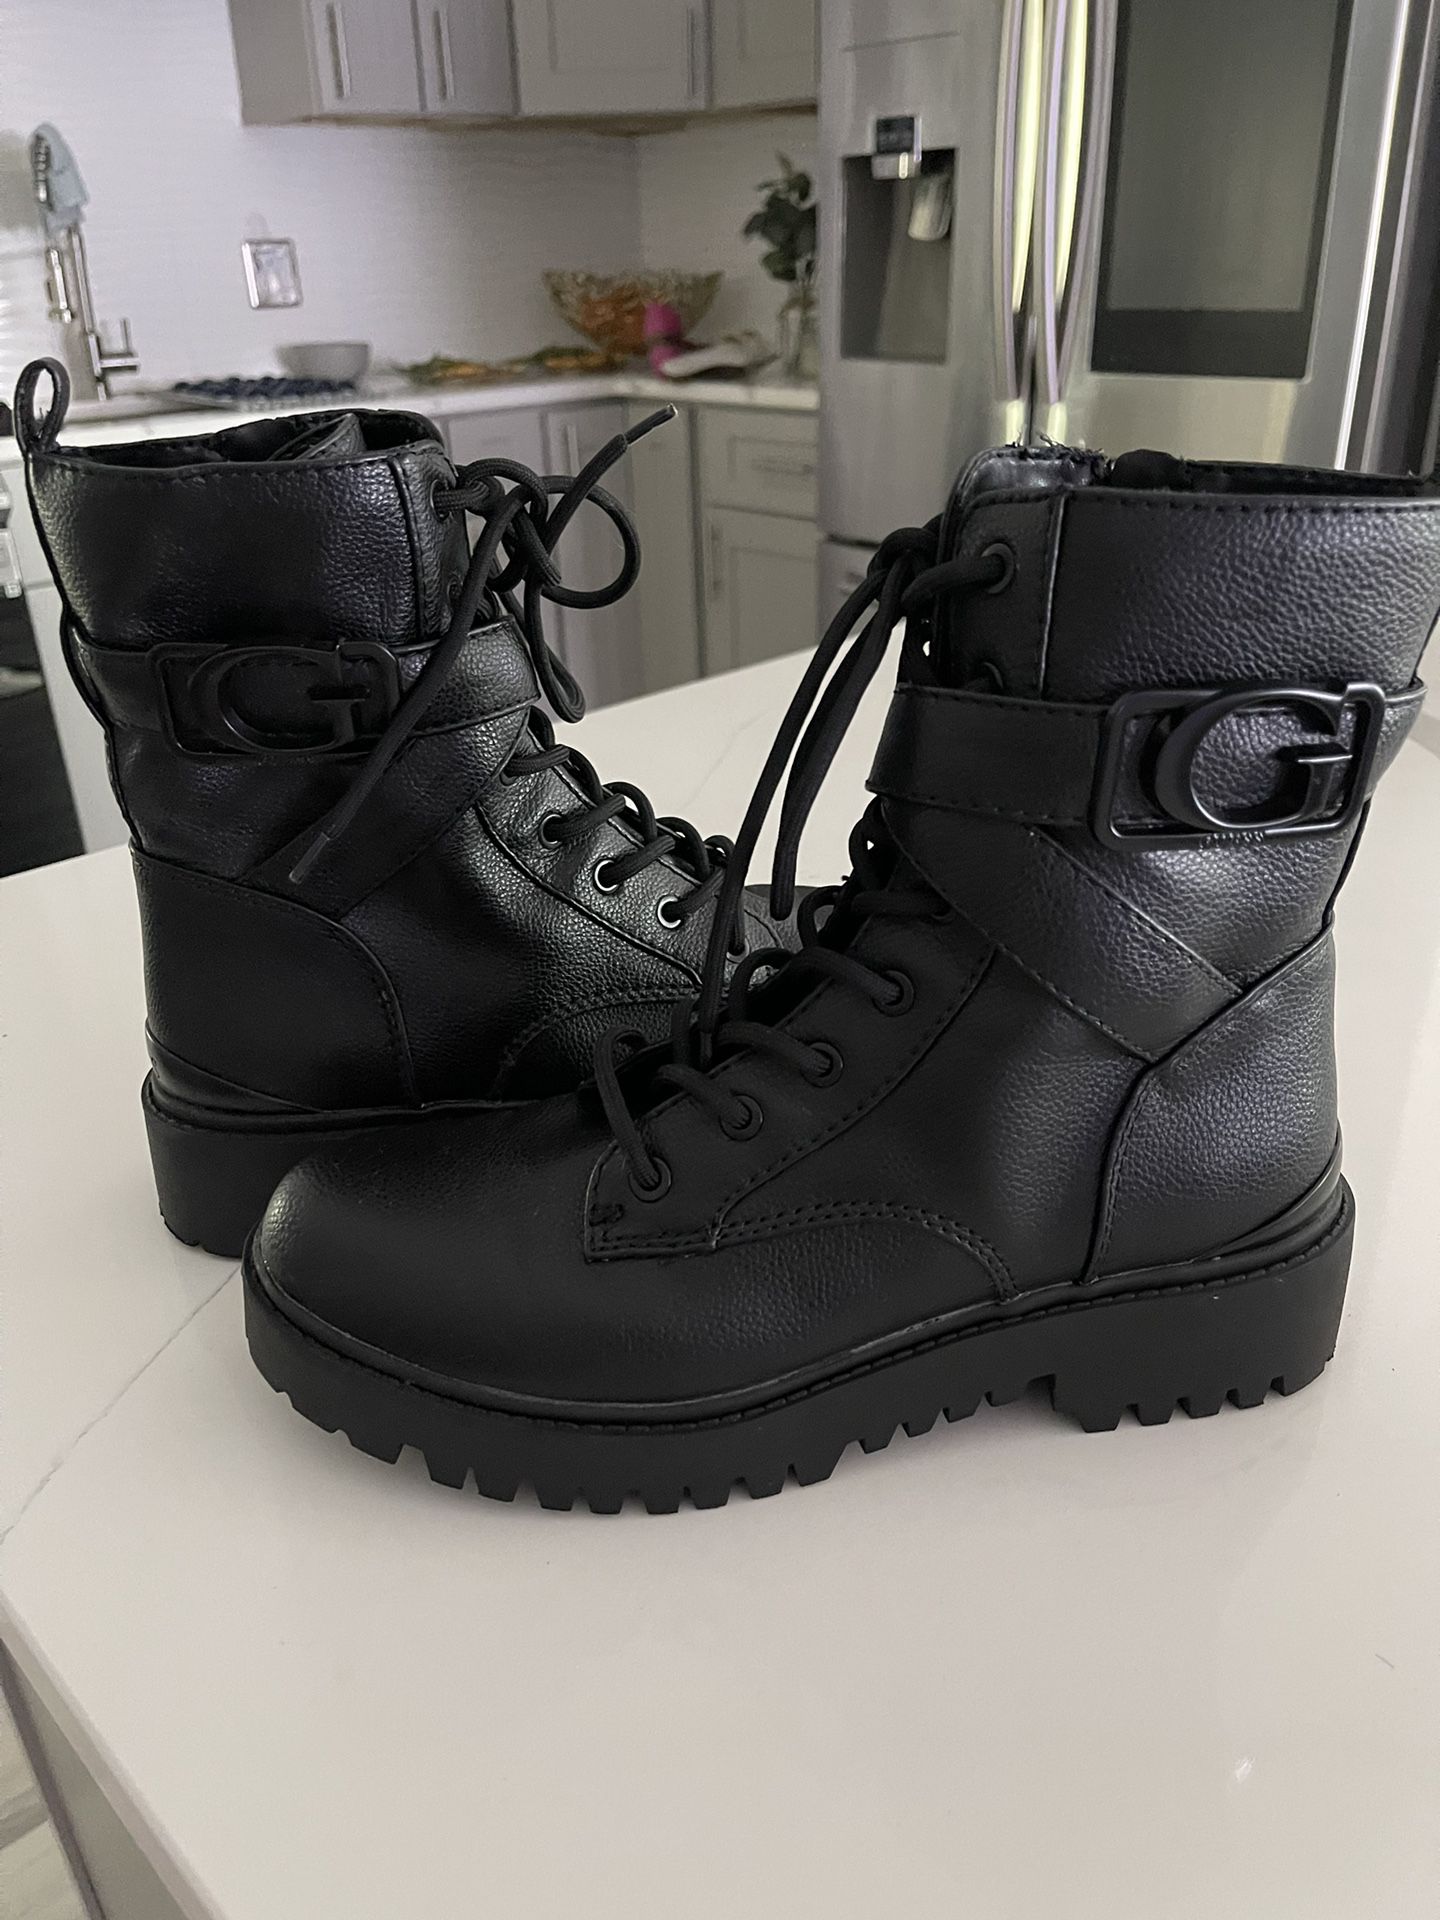 Guess Women’s Boots. New. Size 8.5